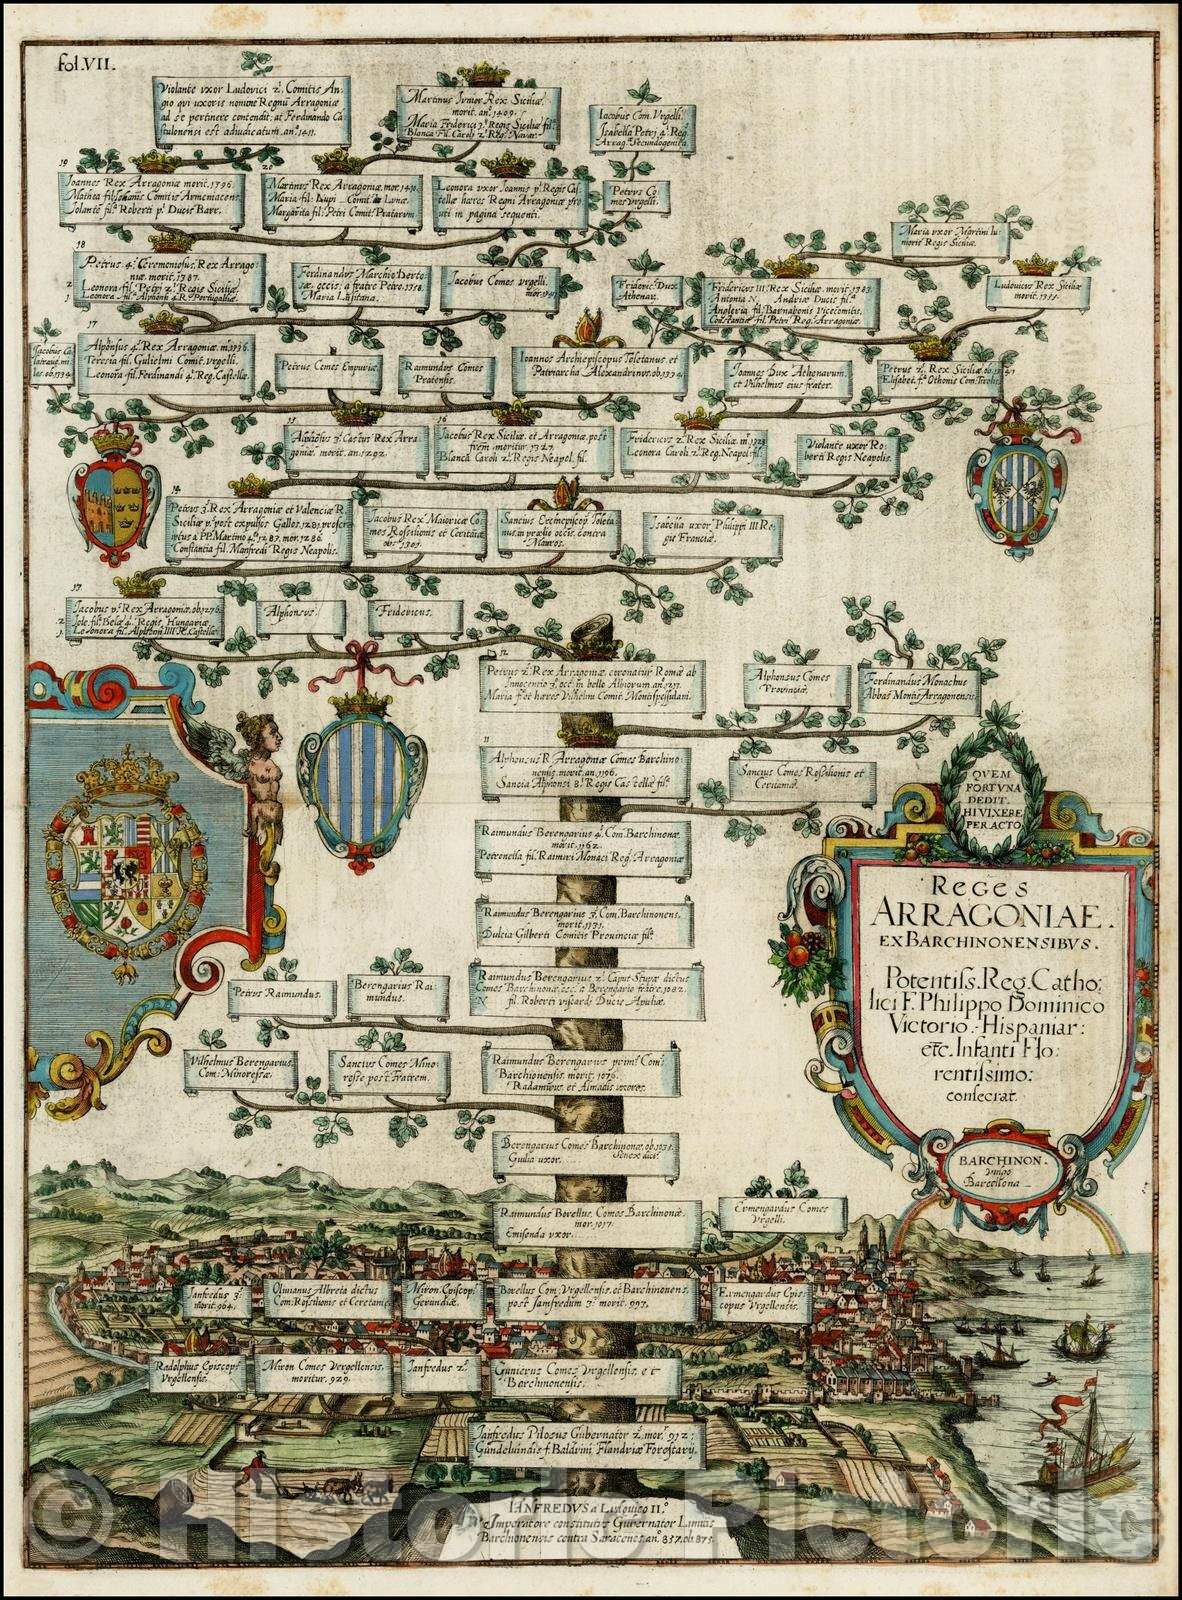 Historic Map - Reges Arragoniae Ex Barchinonensibus Potensis. Reg. Catholici/View of Barcelona and family tree, families of Arragon and Barcelona, 1610 - Vintage Wall Art